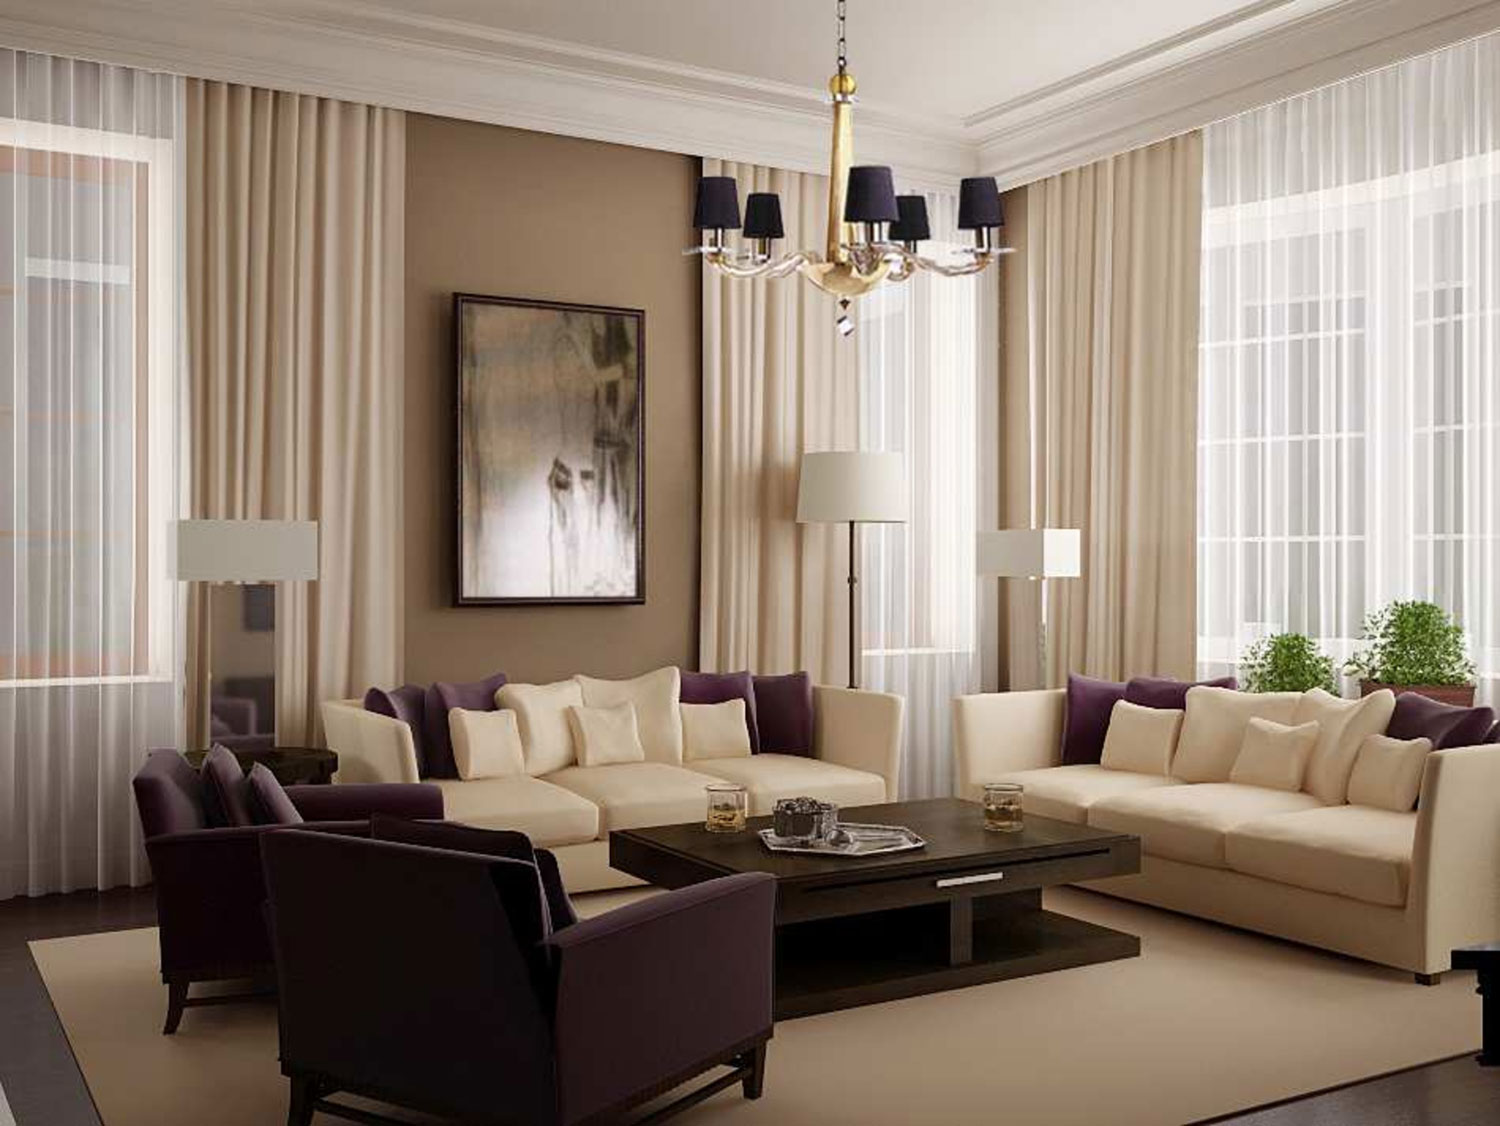 Minimalist Living White Astonishing Minimalist Living Room With White Living Room Curtains And Chandelier Furnished With Double White Sofas Completed With Purple Chairs And Dark Brown Table Living Room Awesome Living Room Curtains Designs